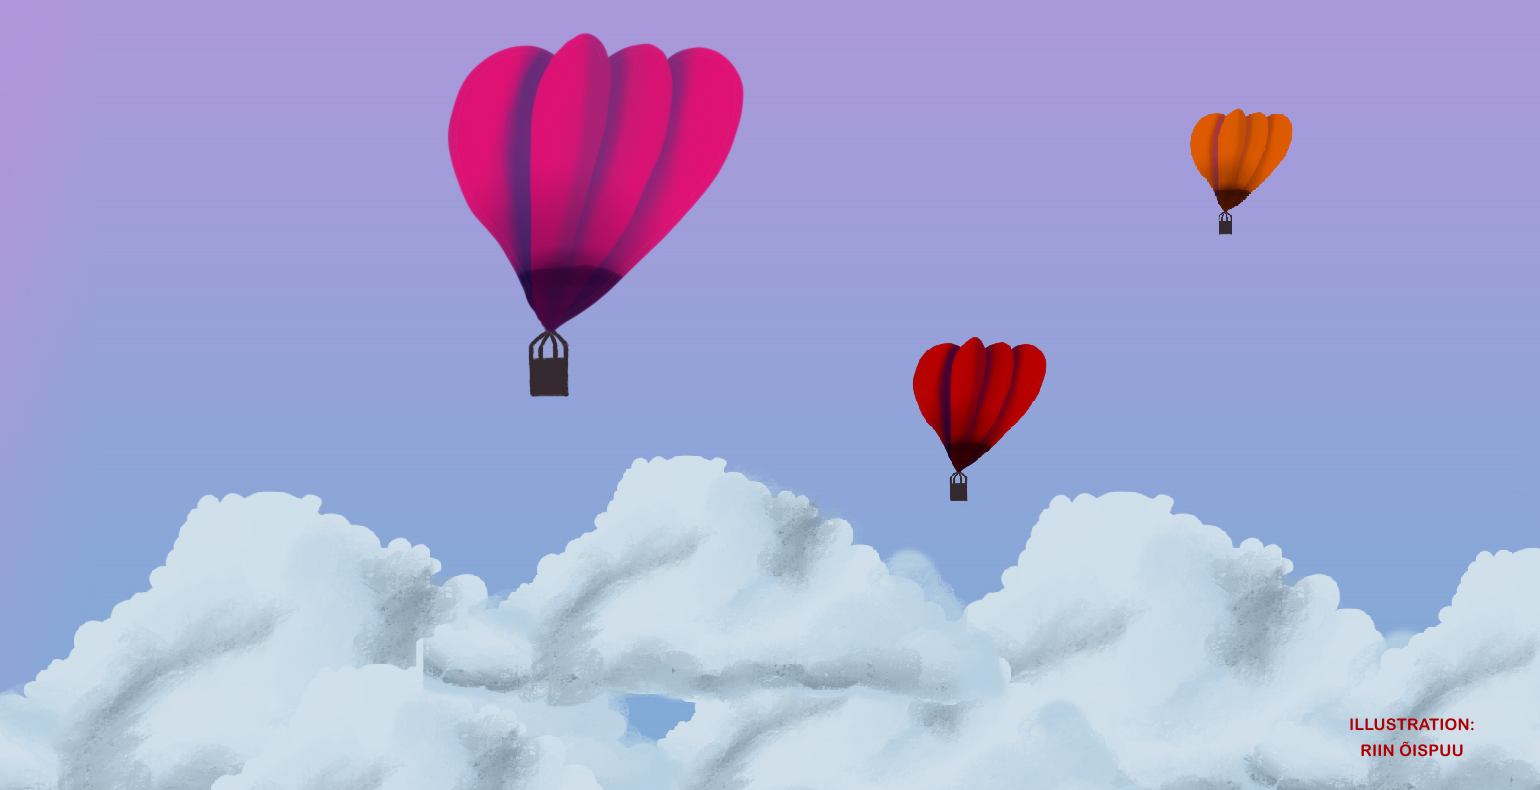 Red-pink hot air balloons flying above the clouds